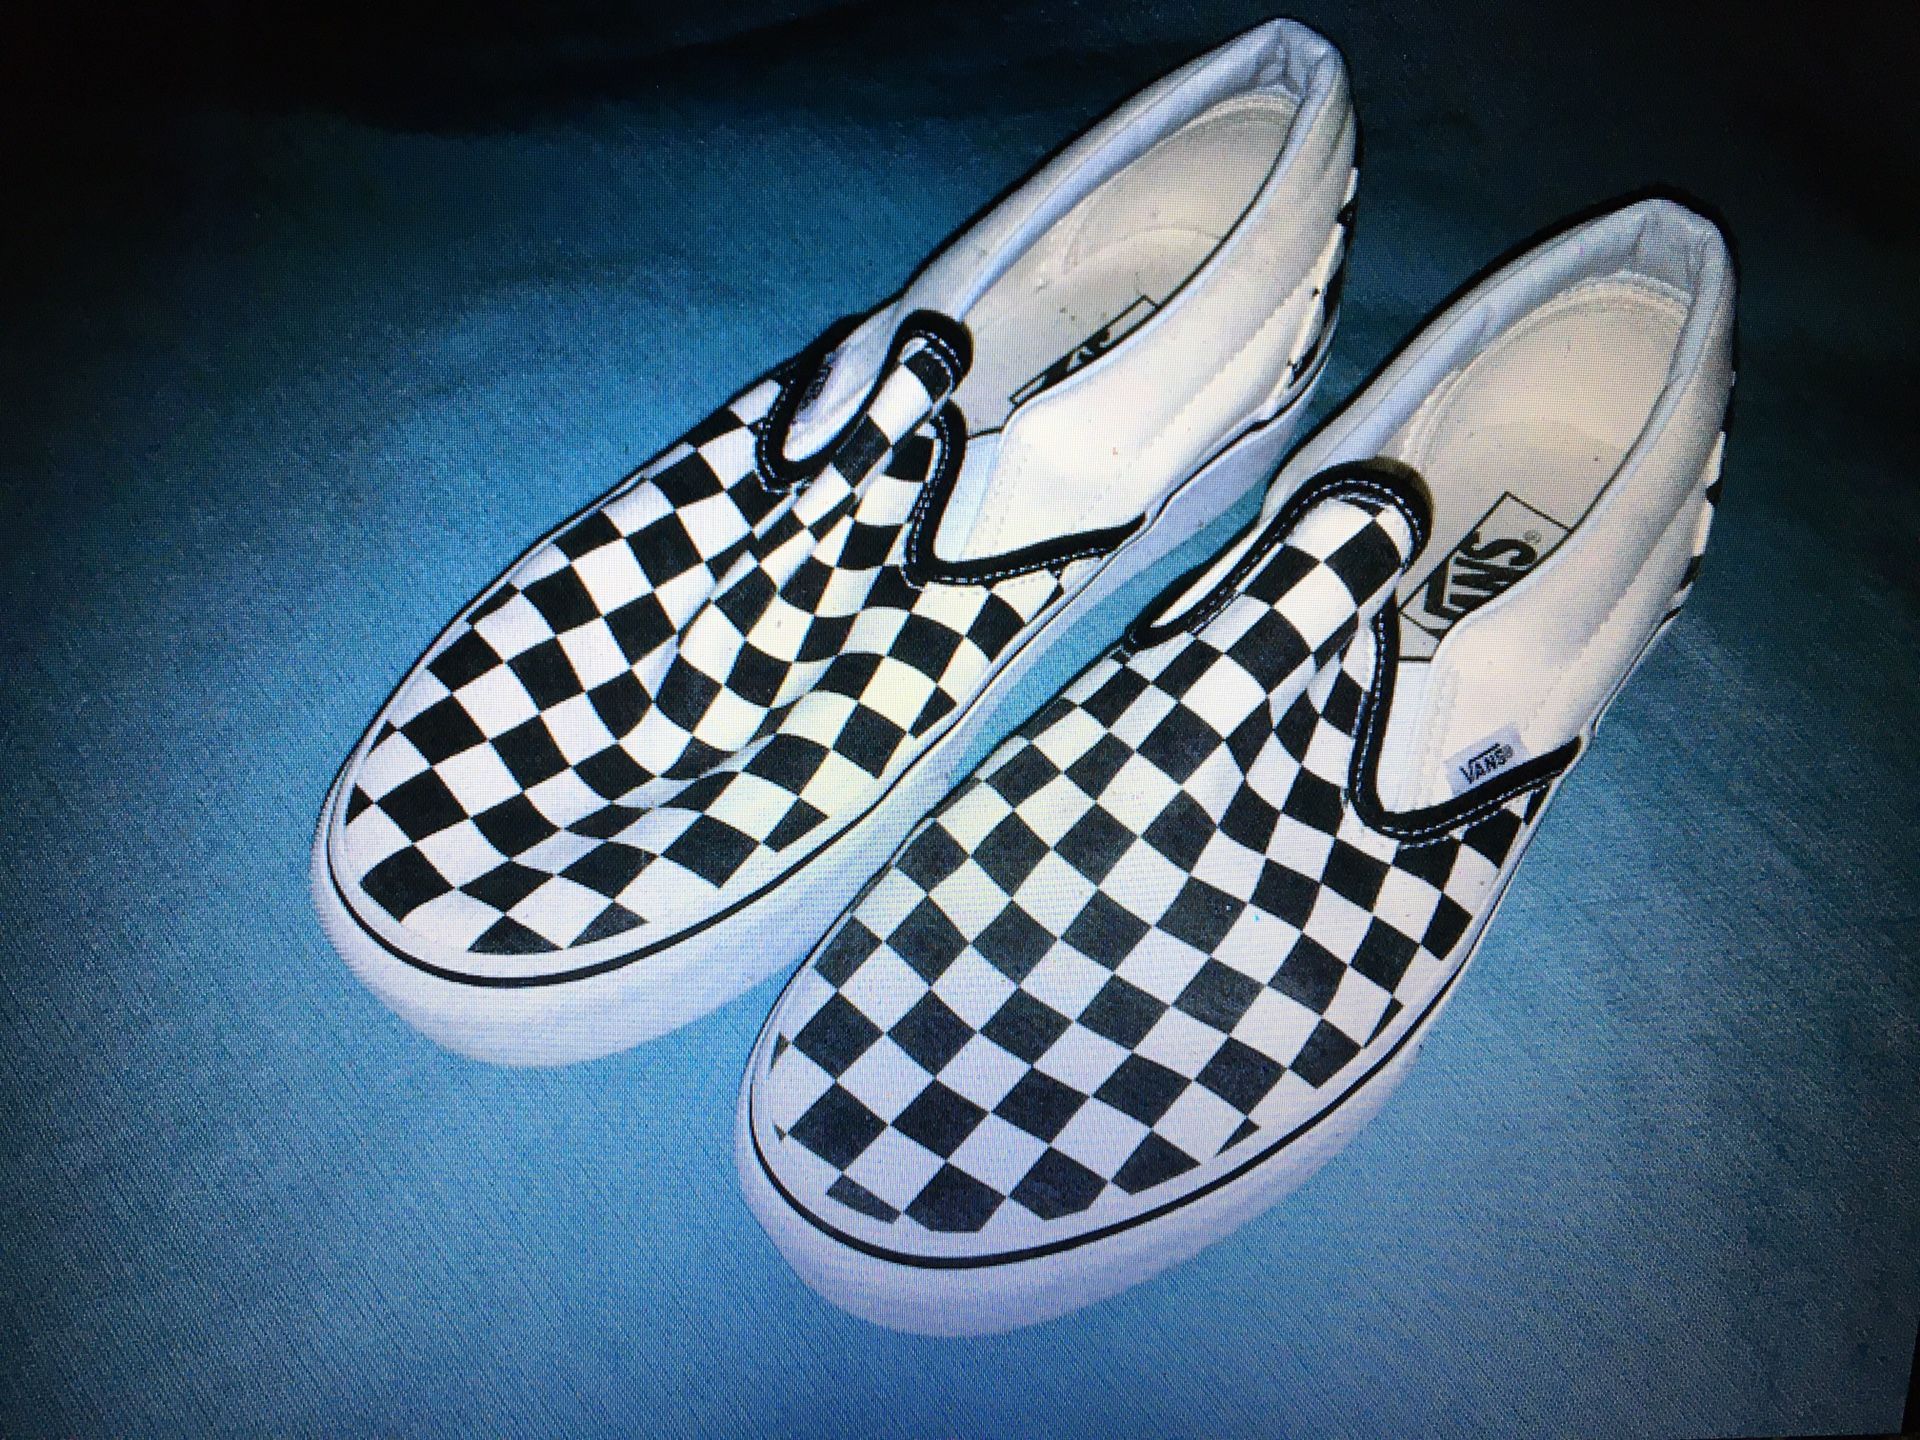 Vans Off the Wall Classic Black White Checkered Slip On Shoes Mens 8 Womens 9.5